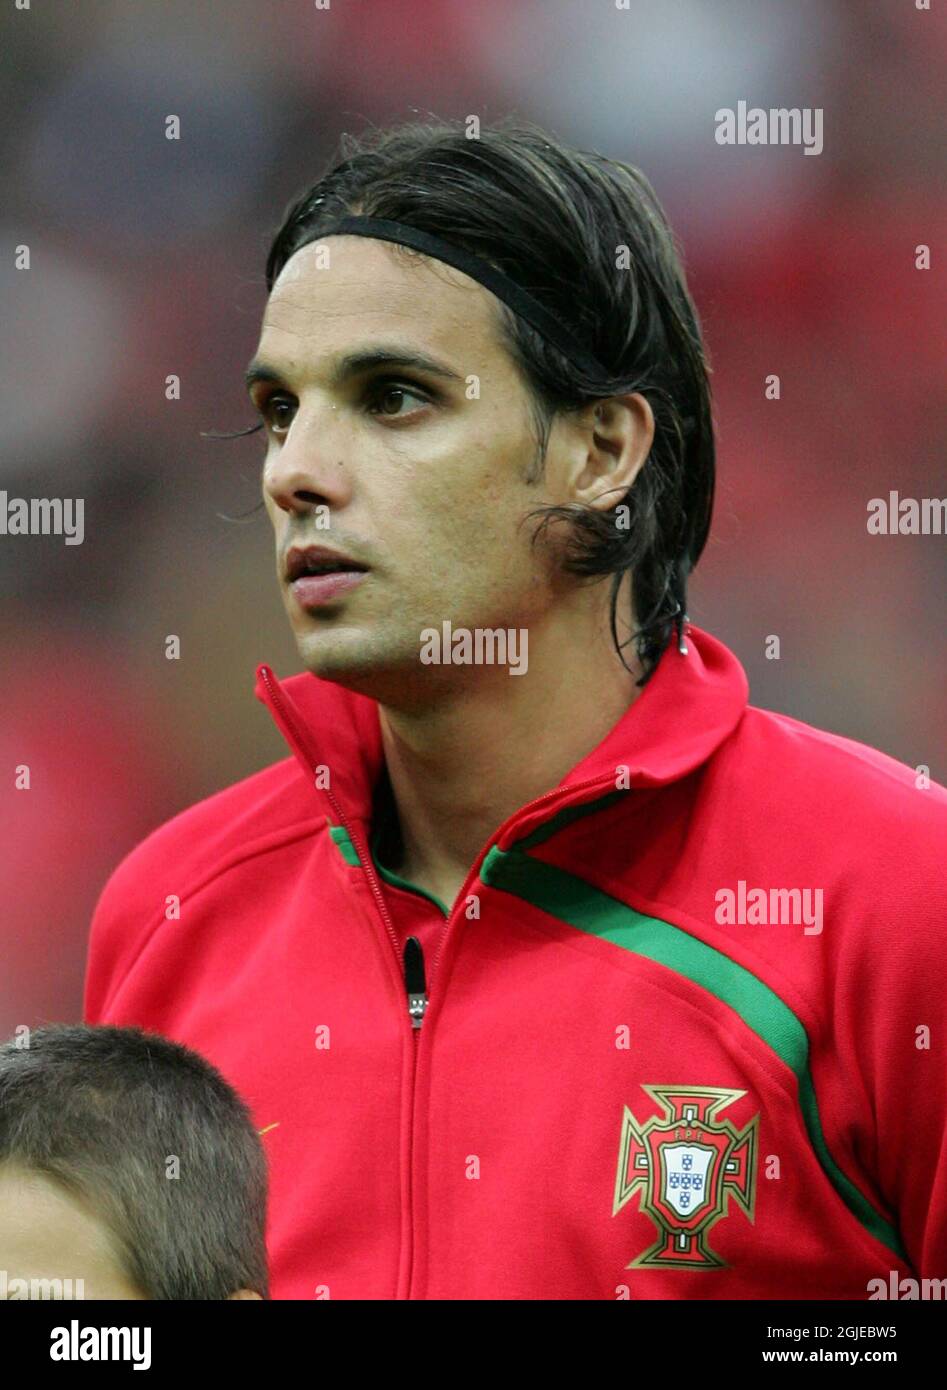 Portugal's Nuno GOMES during the group A match between Portugal and Turkey in Geneva, Switzerland at the Euro 2008 European Soccer Championships Stock Photo